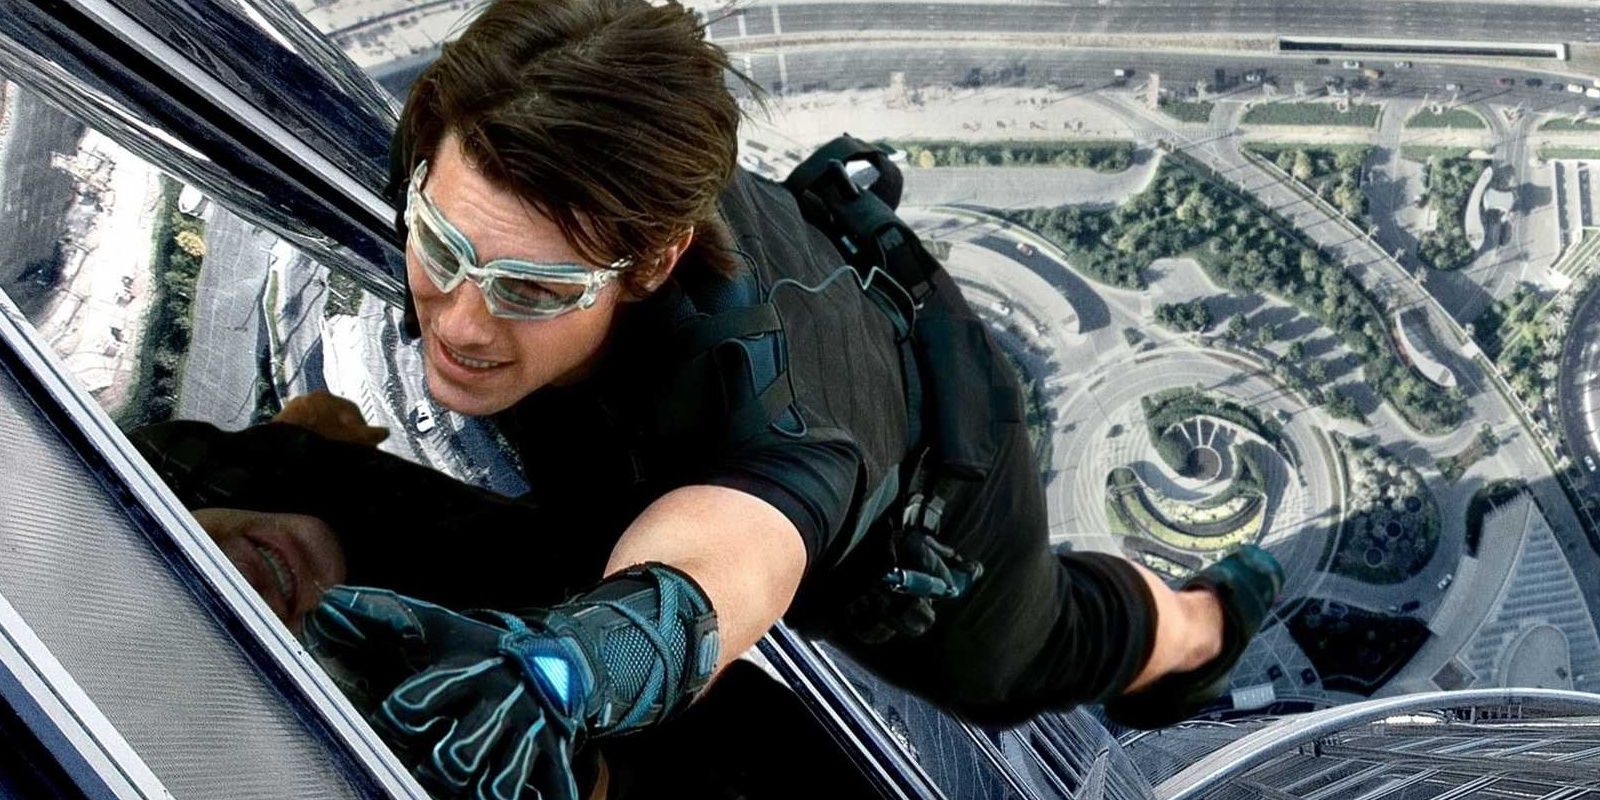 mission impossible 5 full movie watch online free